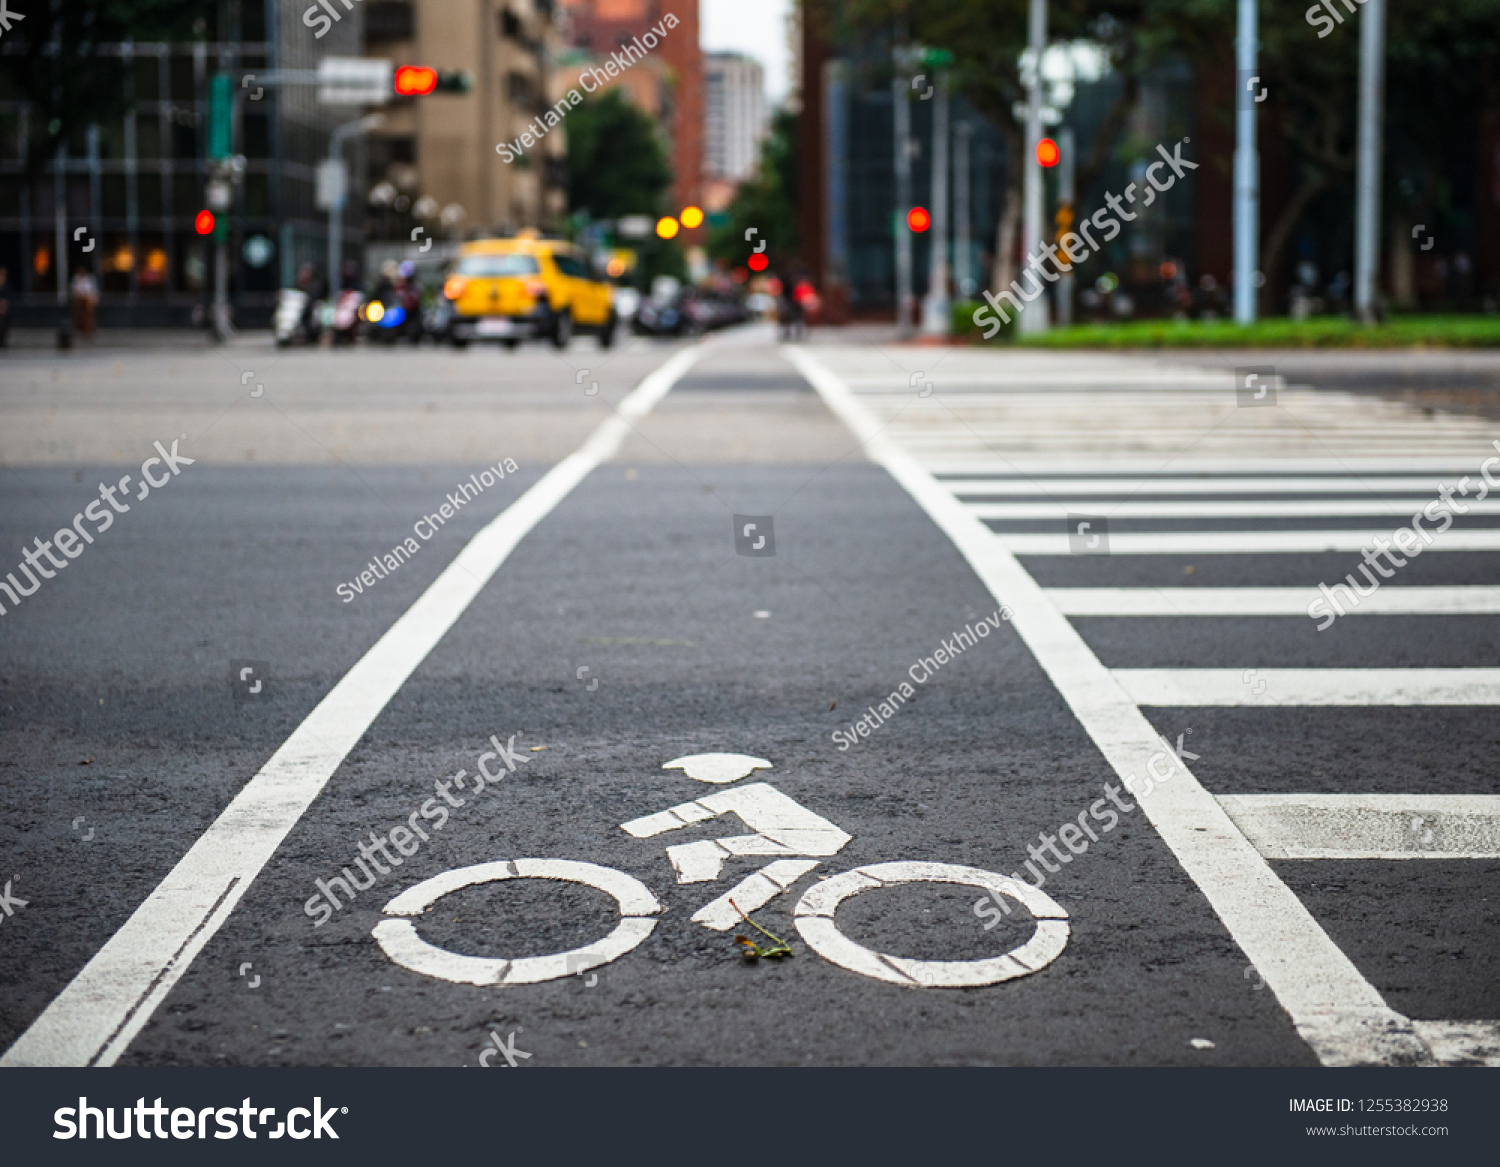 Bicycle lane with bicycle white road sign. Sustainable lifestyle concept.  #1255382938